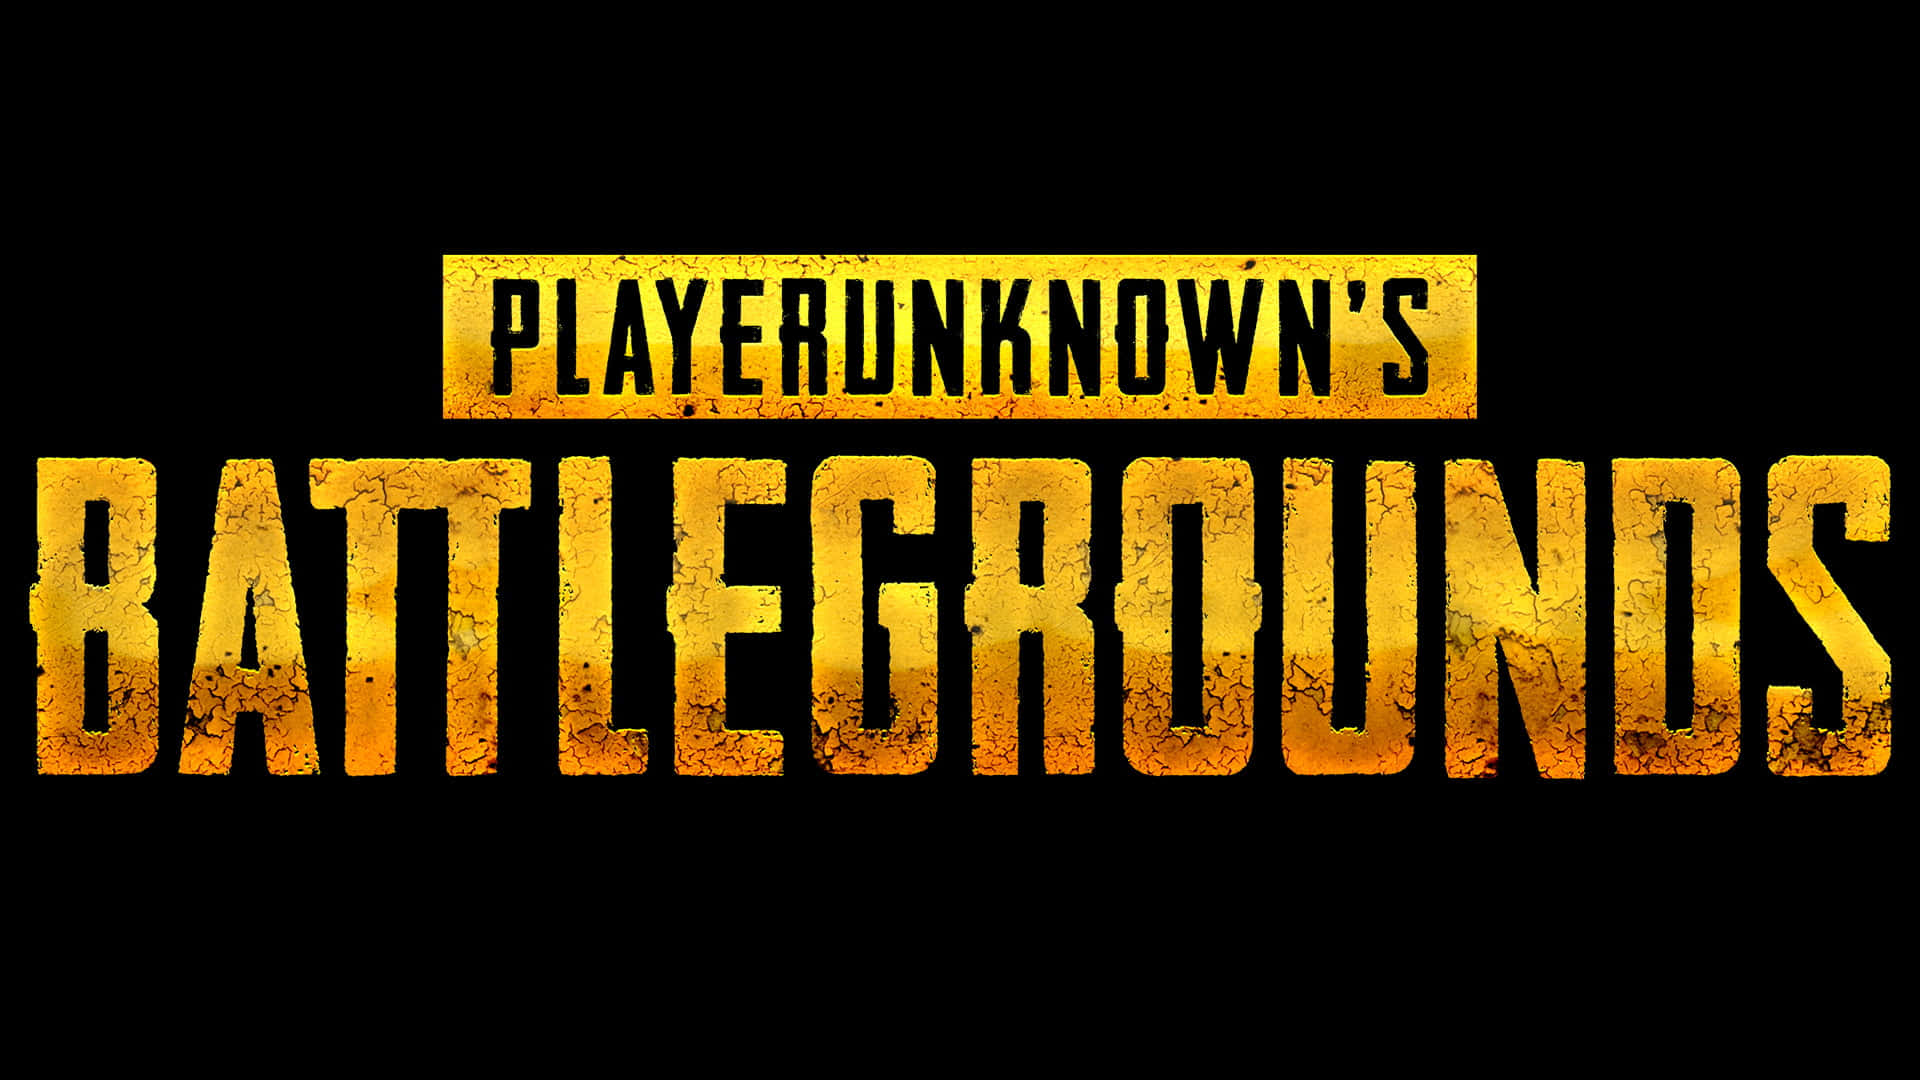 Logoet for Playerunknowns Battle Grounds tapet